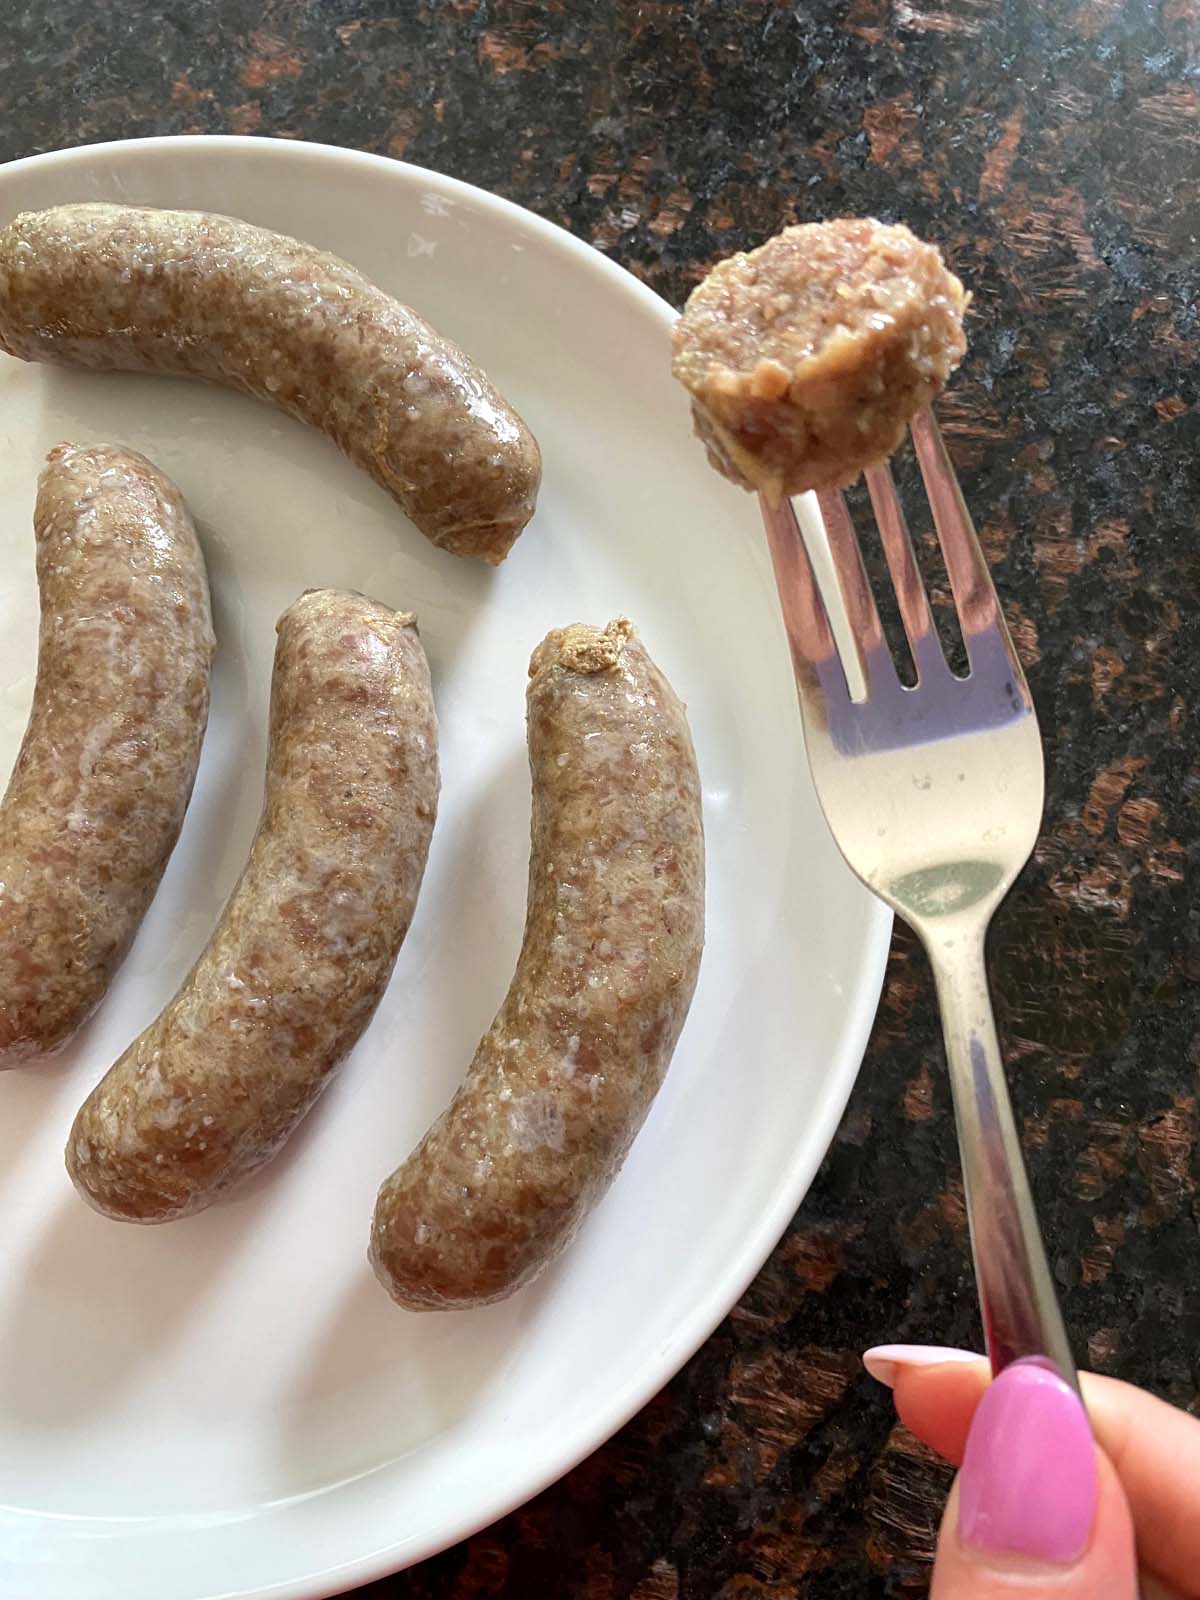 Fork holding a slice of sausage over a plate of brats.